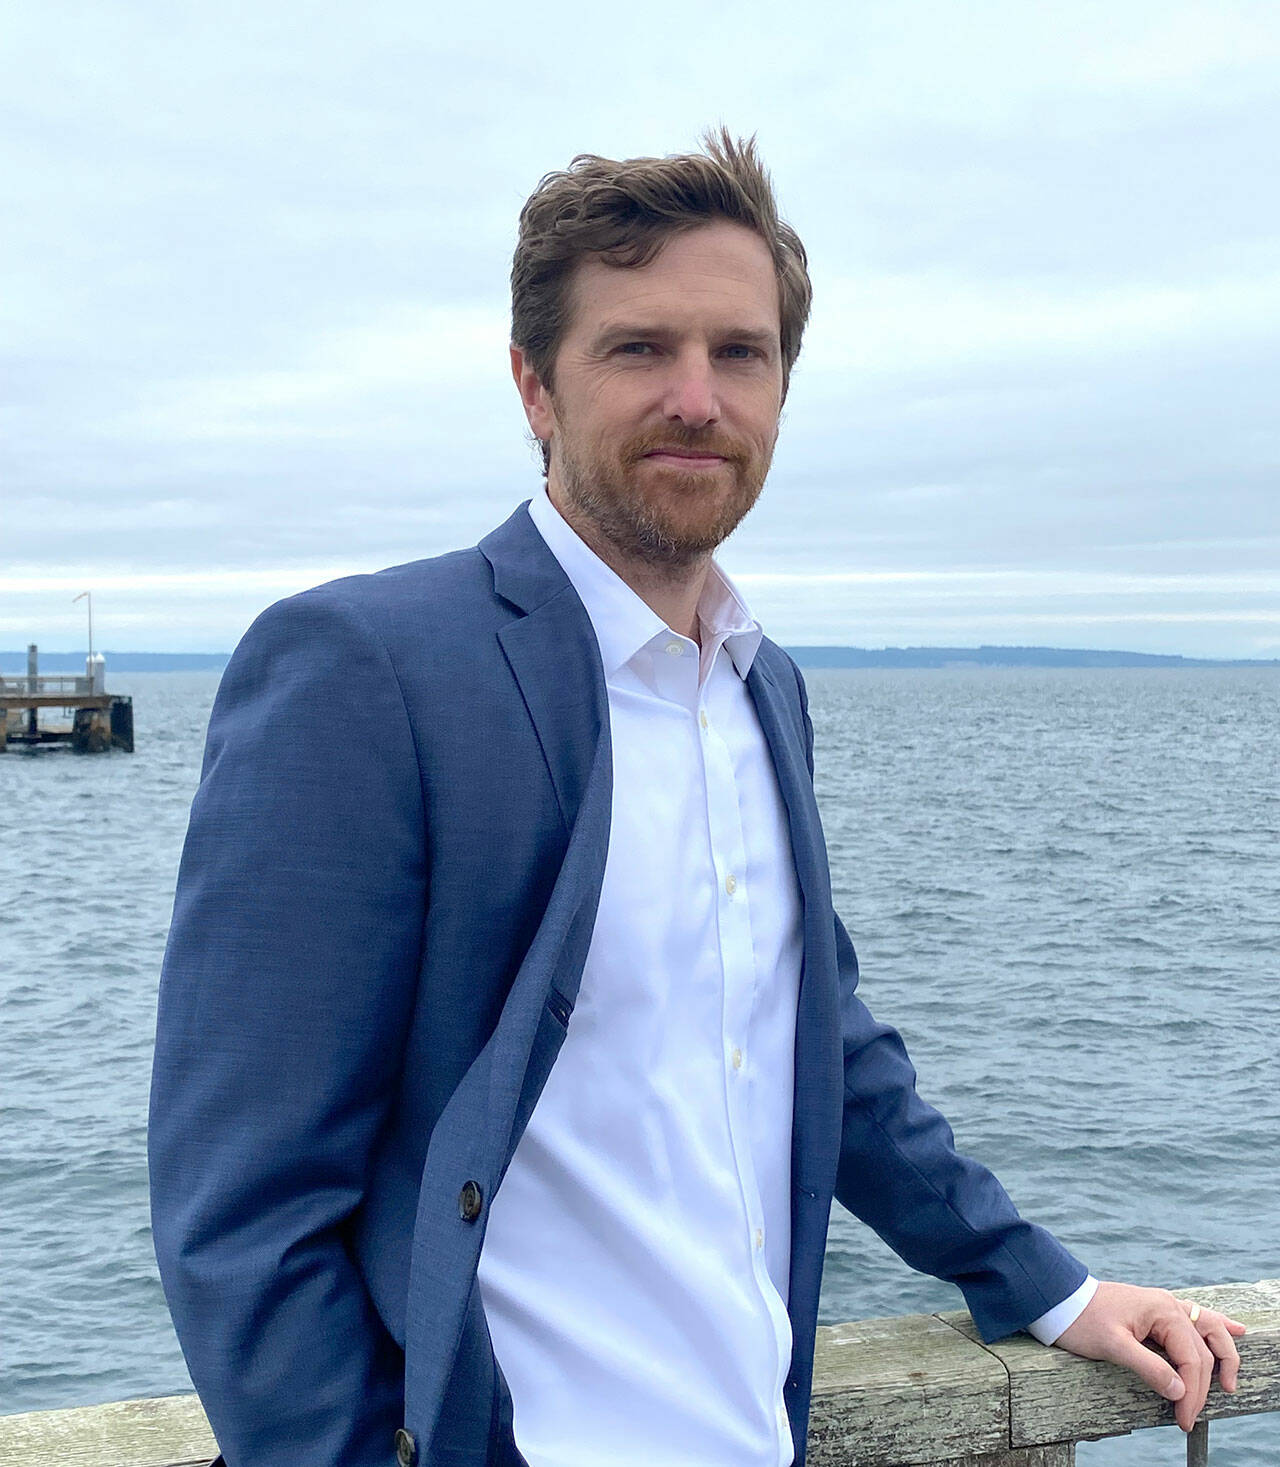 Matt Klontz, former Public Works director for the City of Sequim, is the new director of capital projects and chief engineer for the Port of Port Townsend. (Port of Port Townsend)